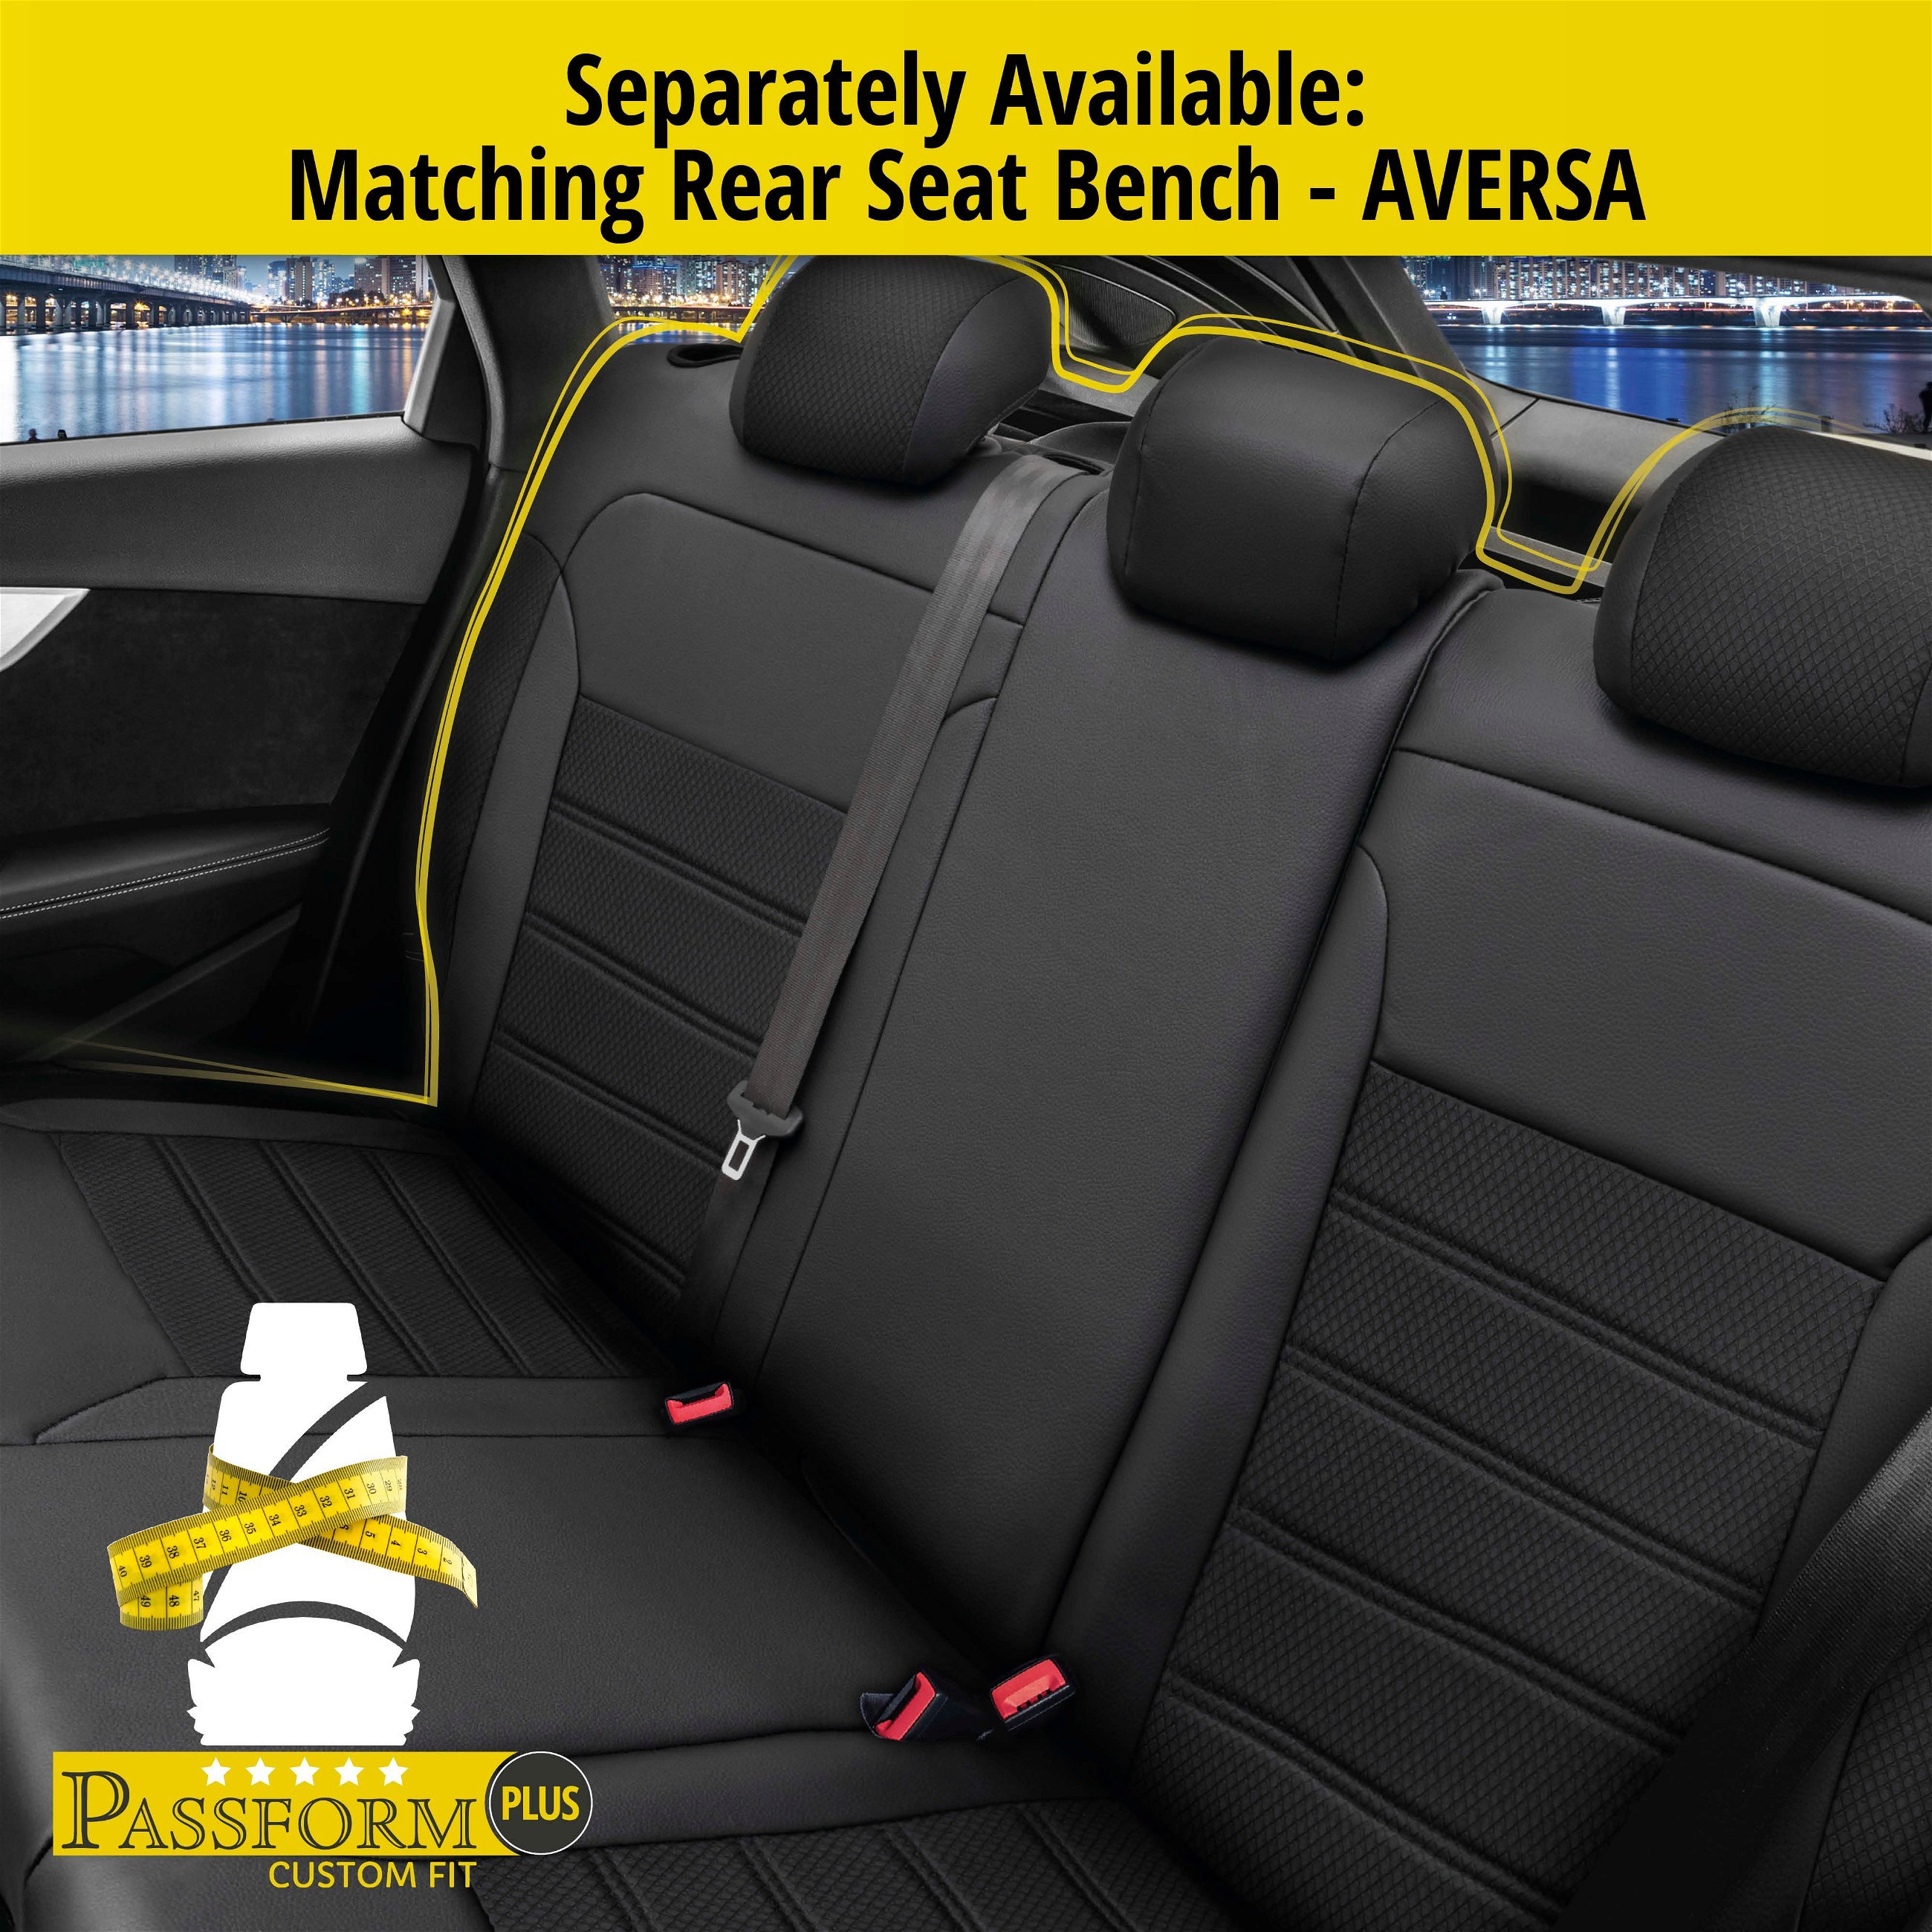 Seat Cover Aversa for VW Golf VII 08/2012-03/2021, VW Golf VII Variant 04/2012-03/2021, 2 seat covers for sport seats